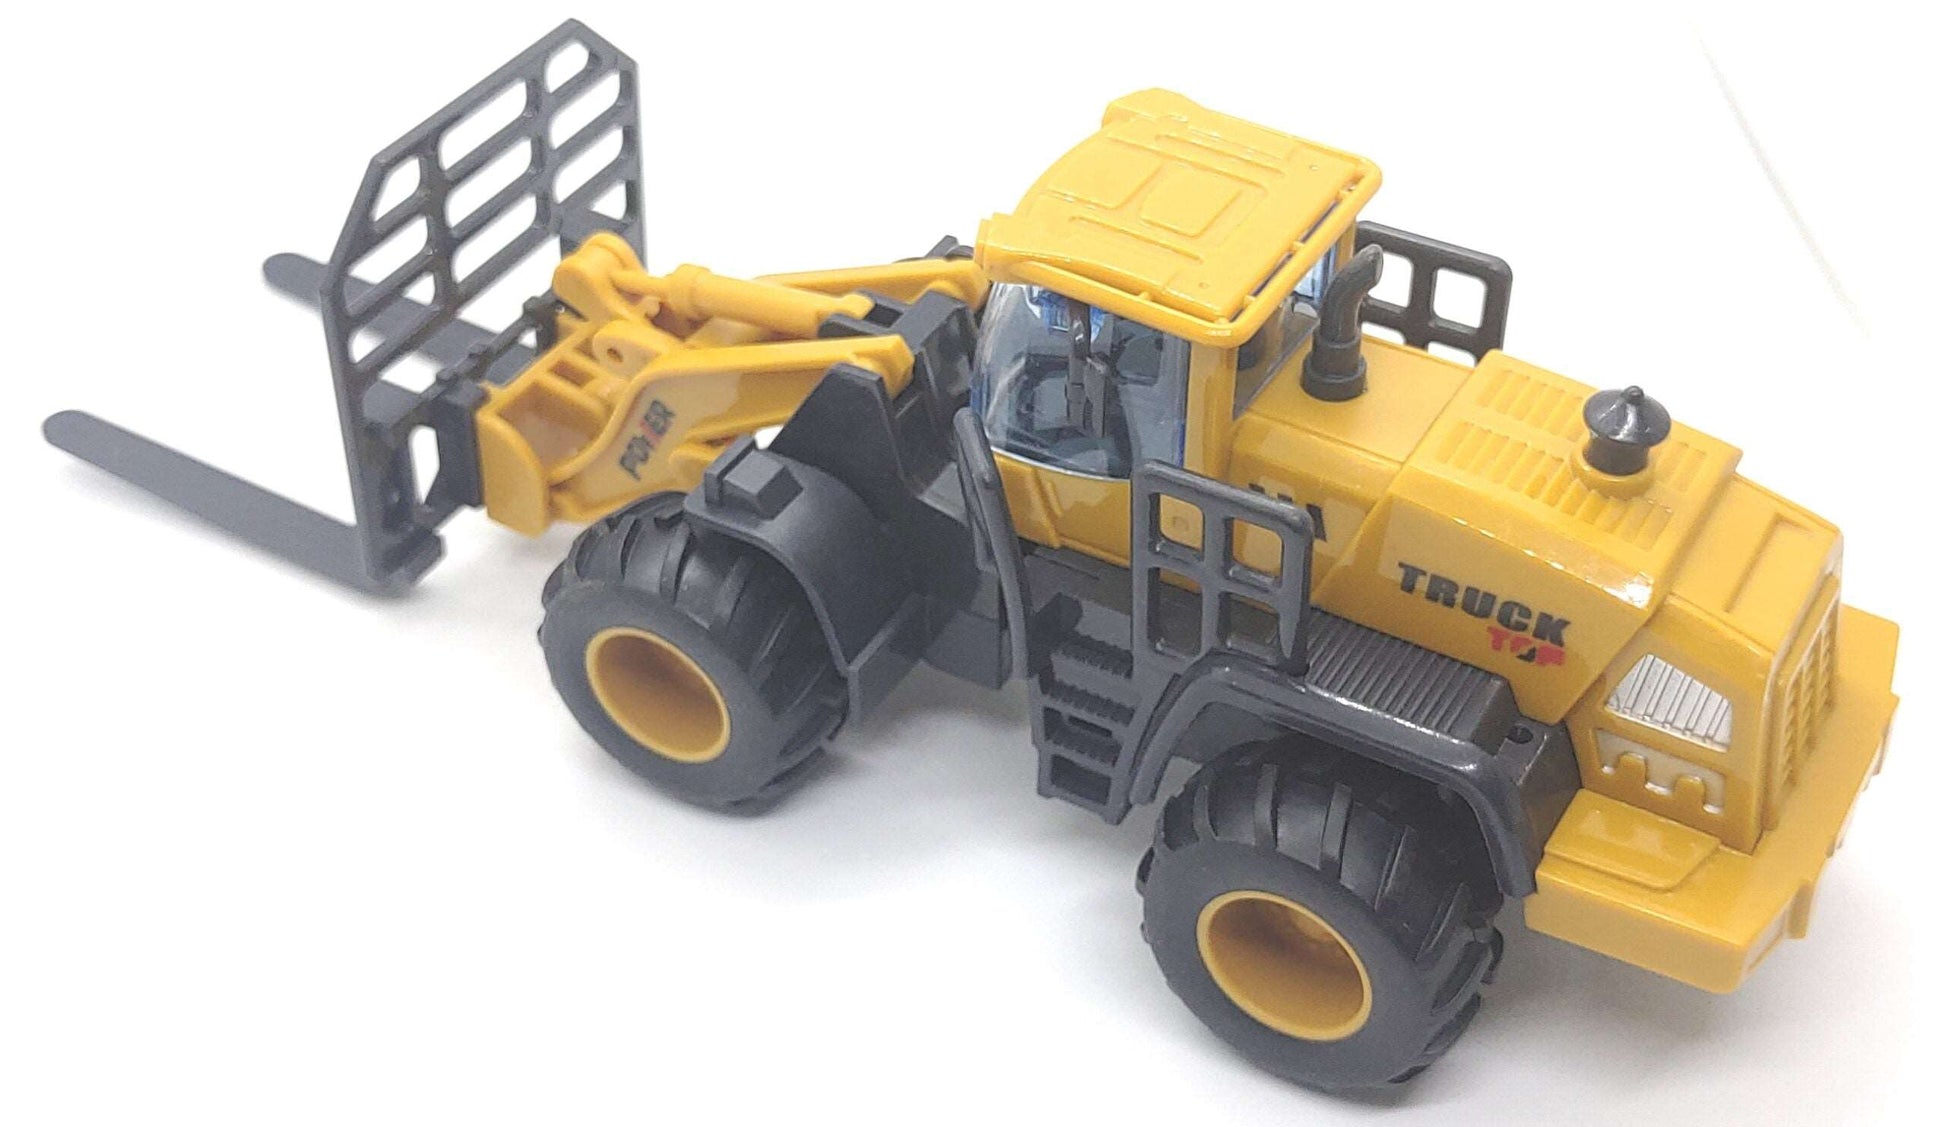 AZI Rough Terrain Fork lifter Construction Earth Mover Toy for Kids (Loader Attachment)